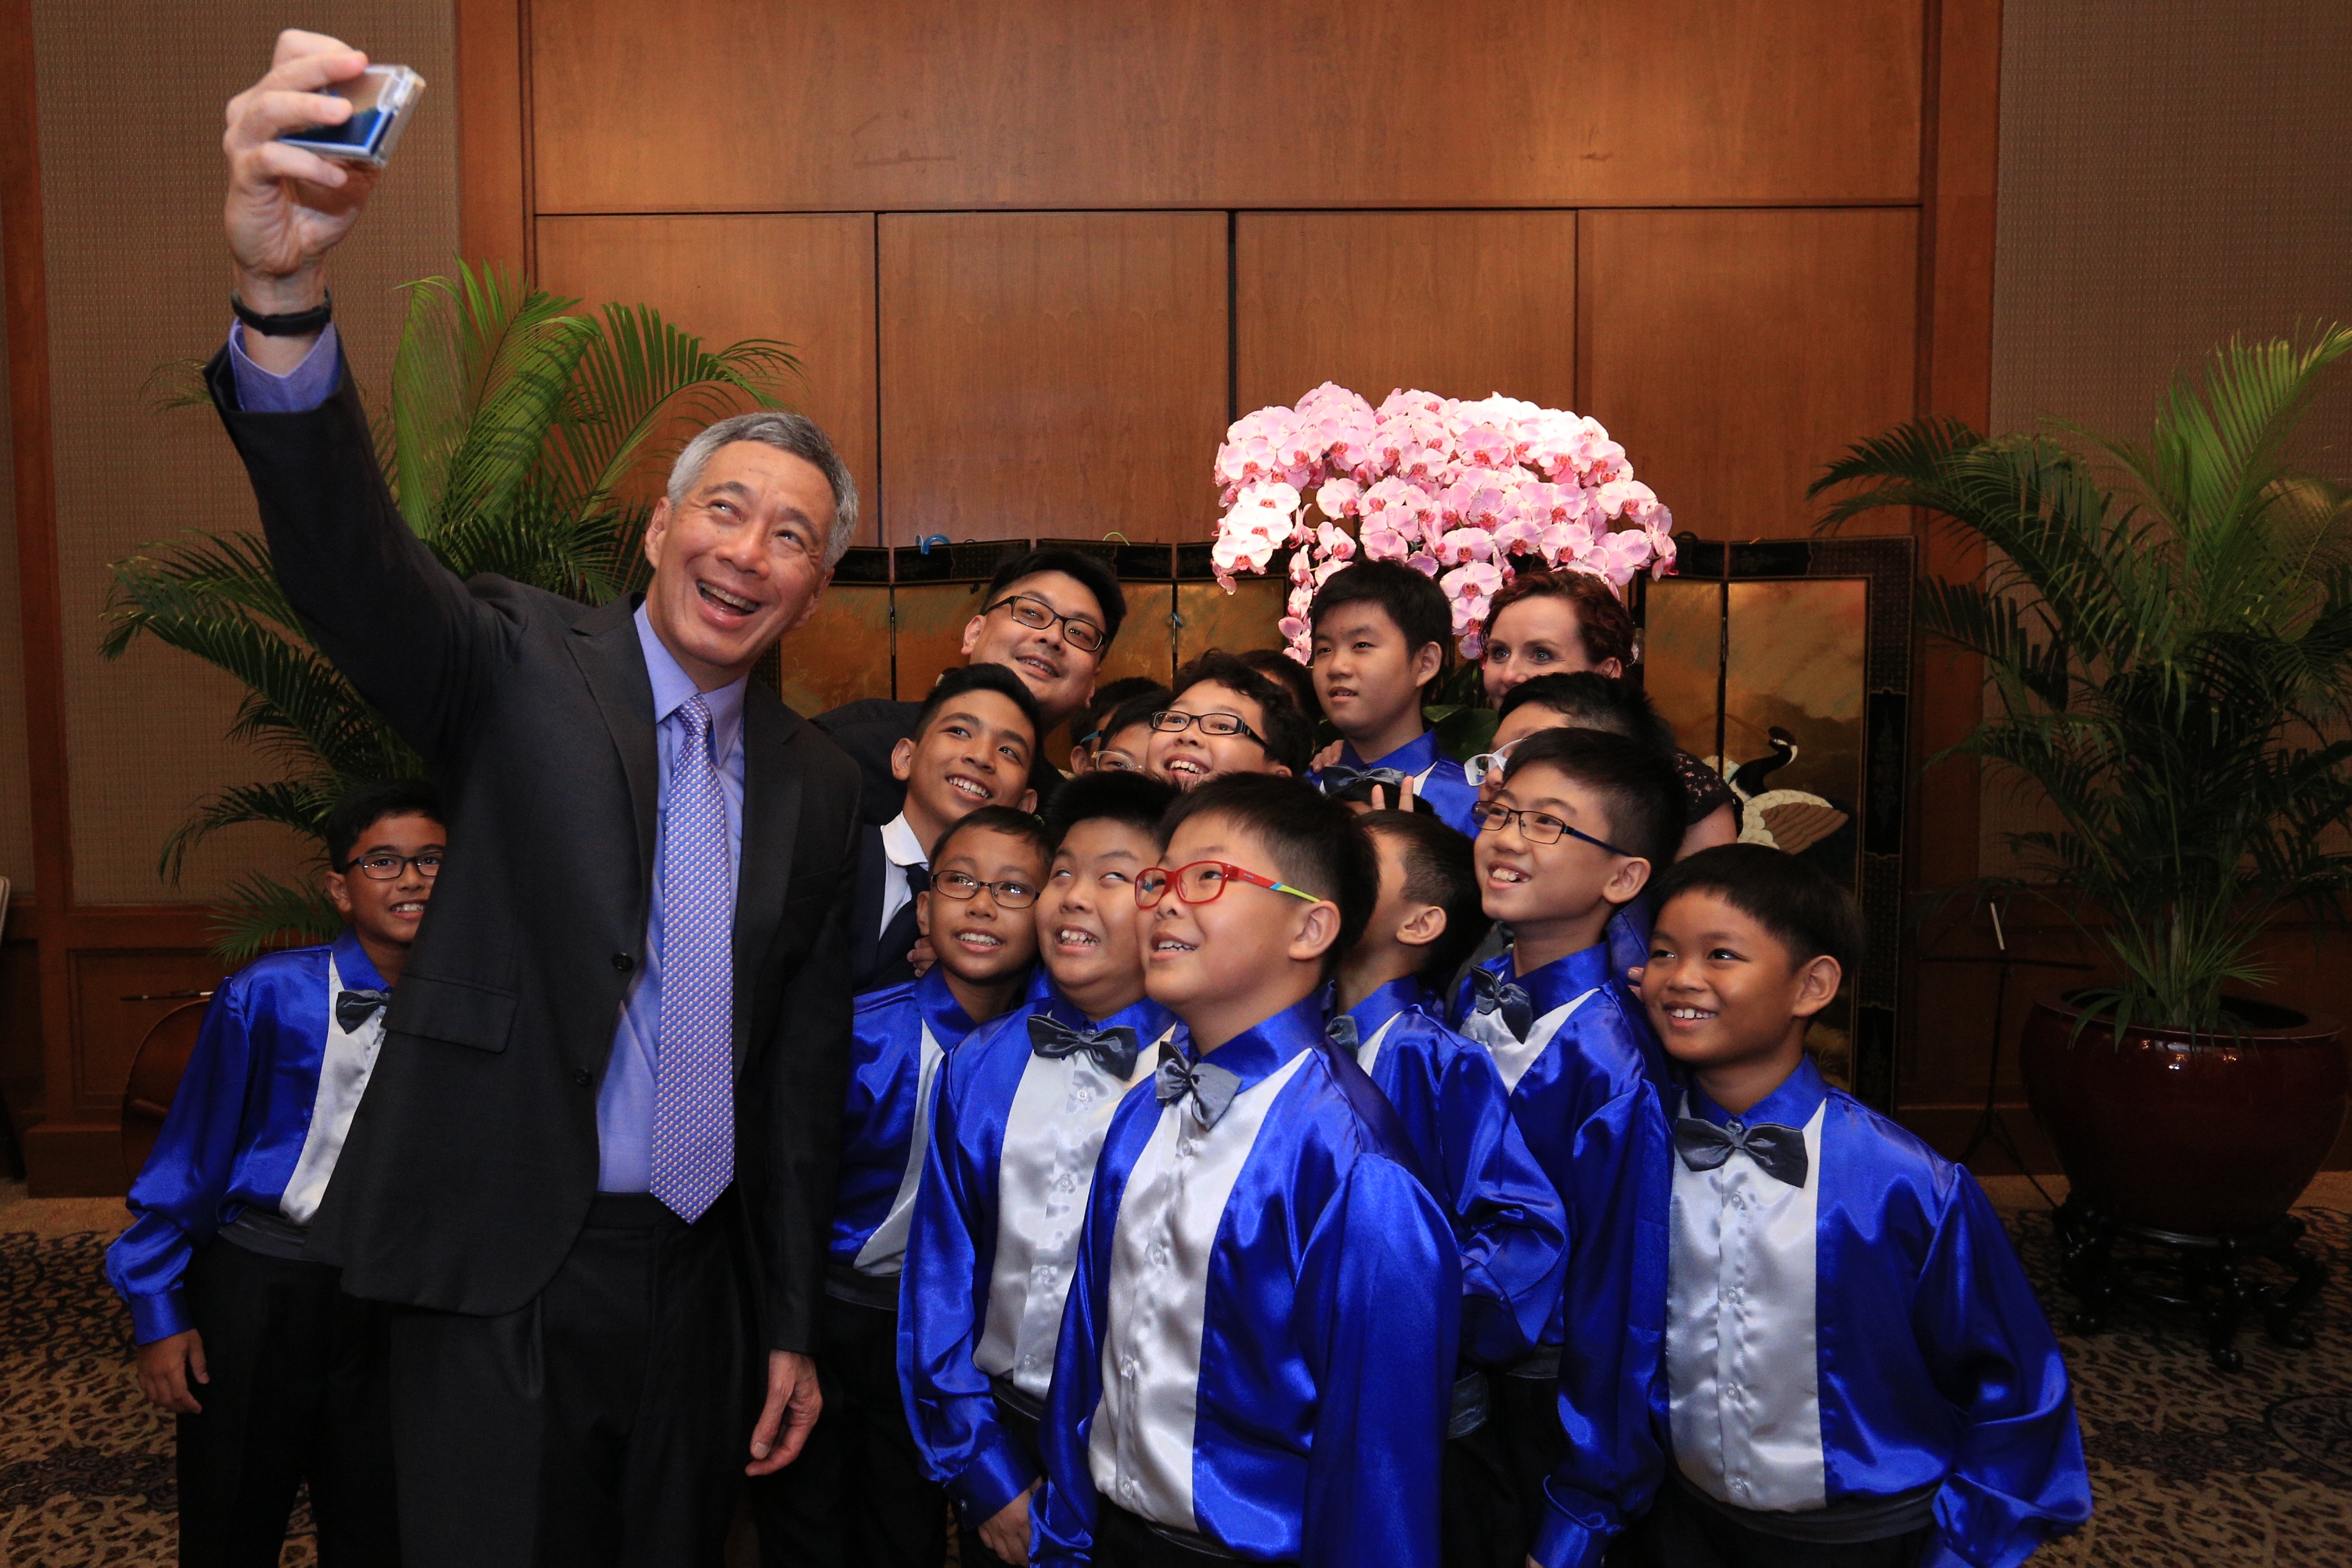 Prime Minister Lee Hsien Loong at Montfort School Centennial Fundraising Dinner on 9 Apr 2016 (MCI Photo by Kenji Soon)